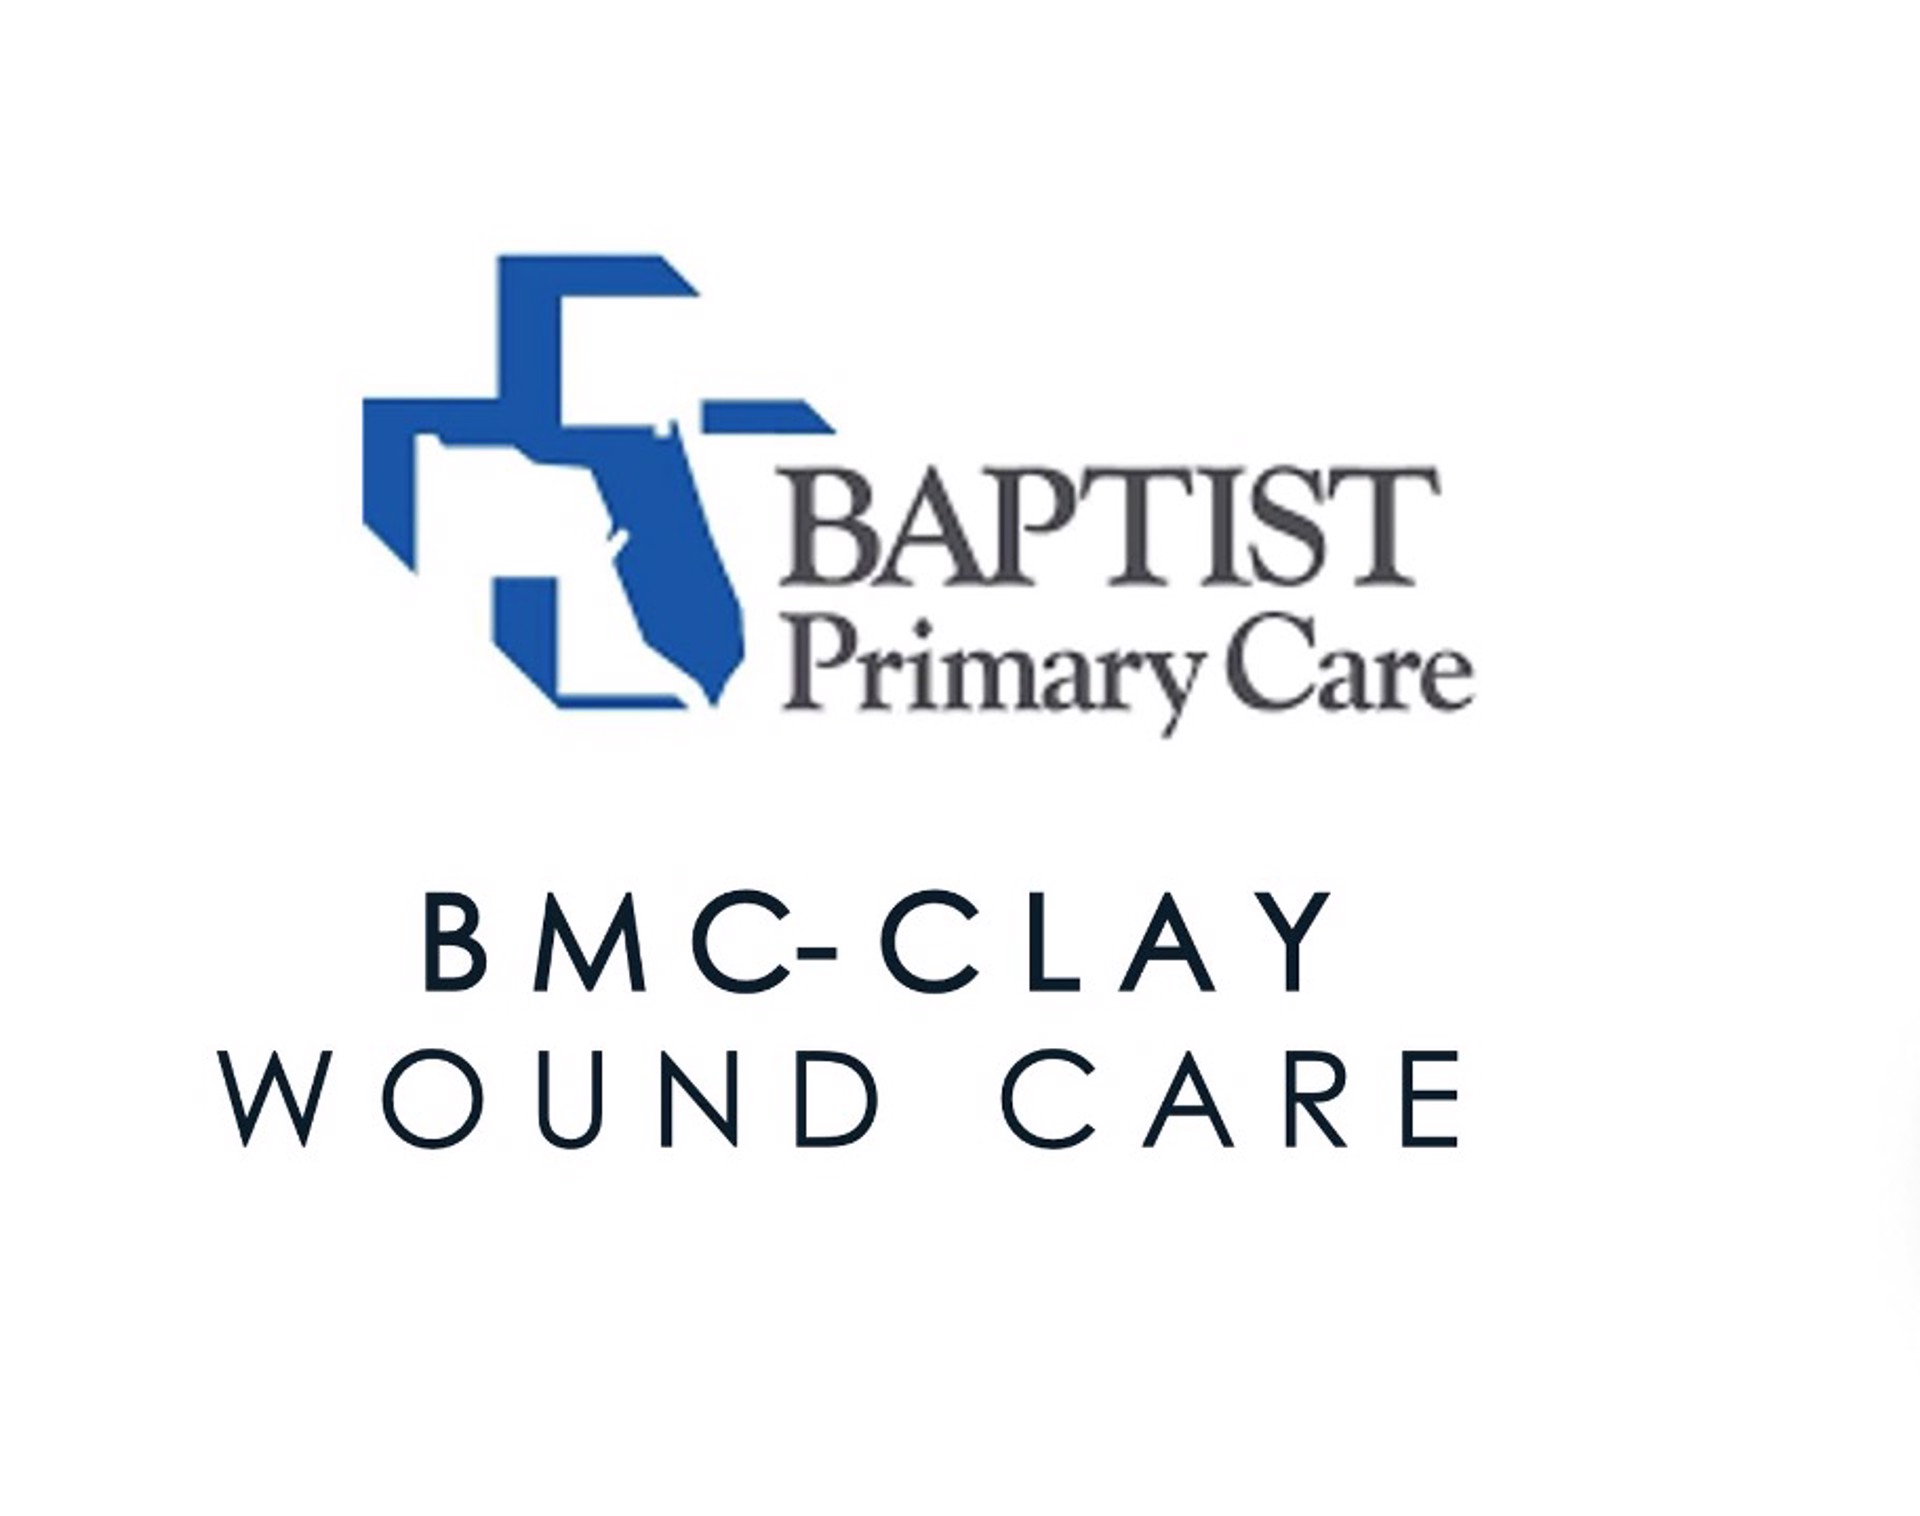 BMC Clay Wound Care Art- 10 photography on acrylic w standoffs 4 Hagers on paper install included by Printwork